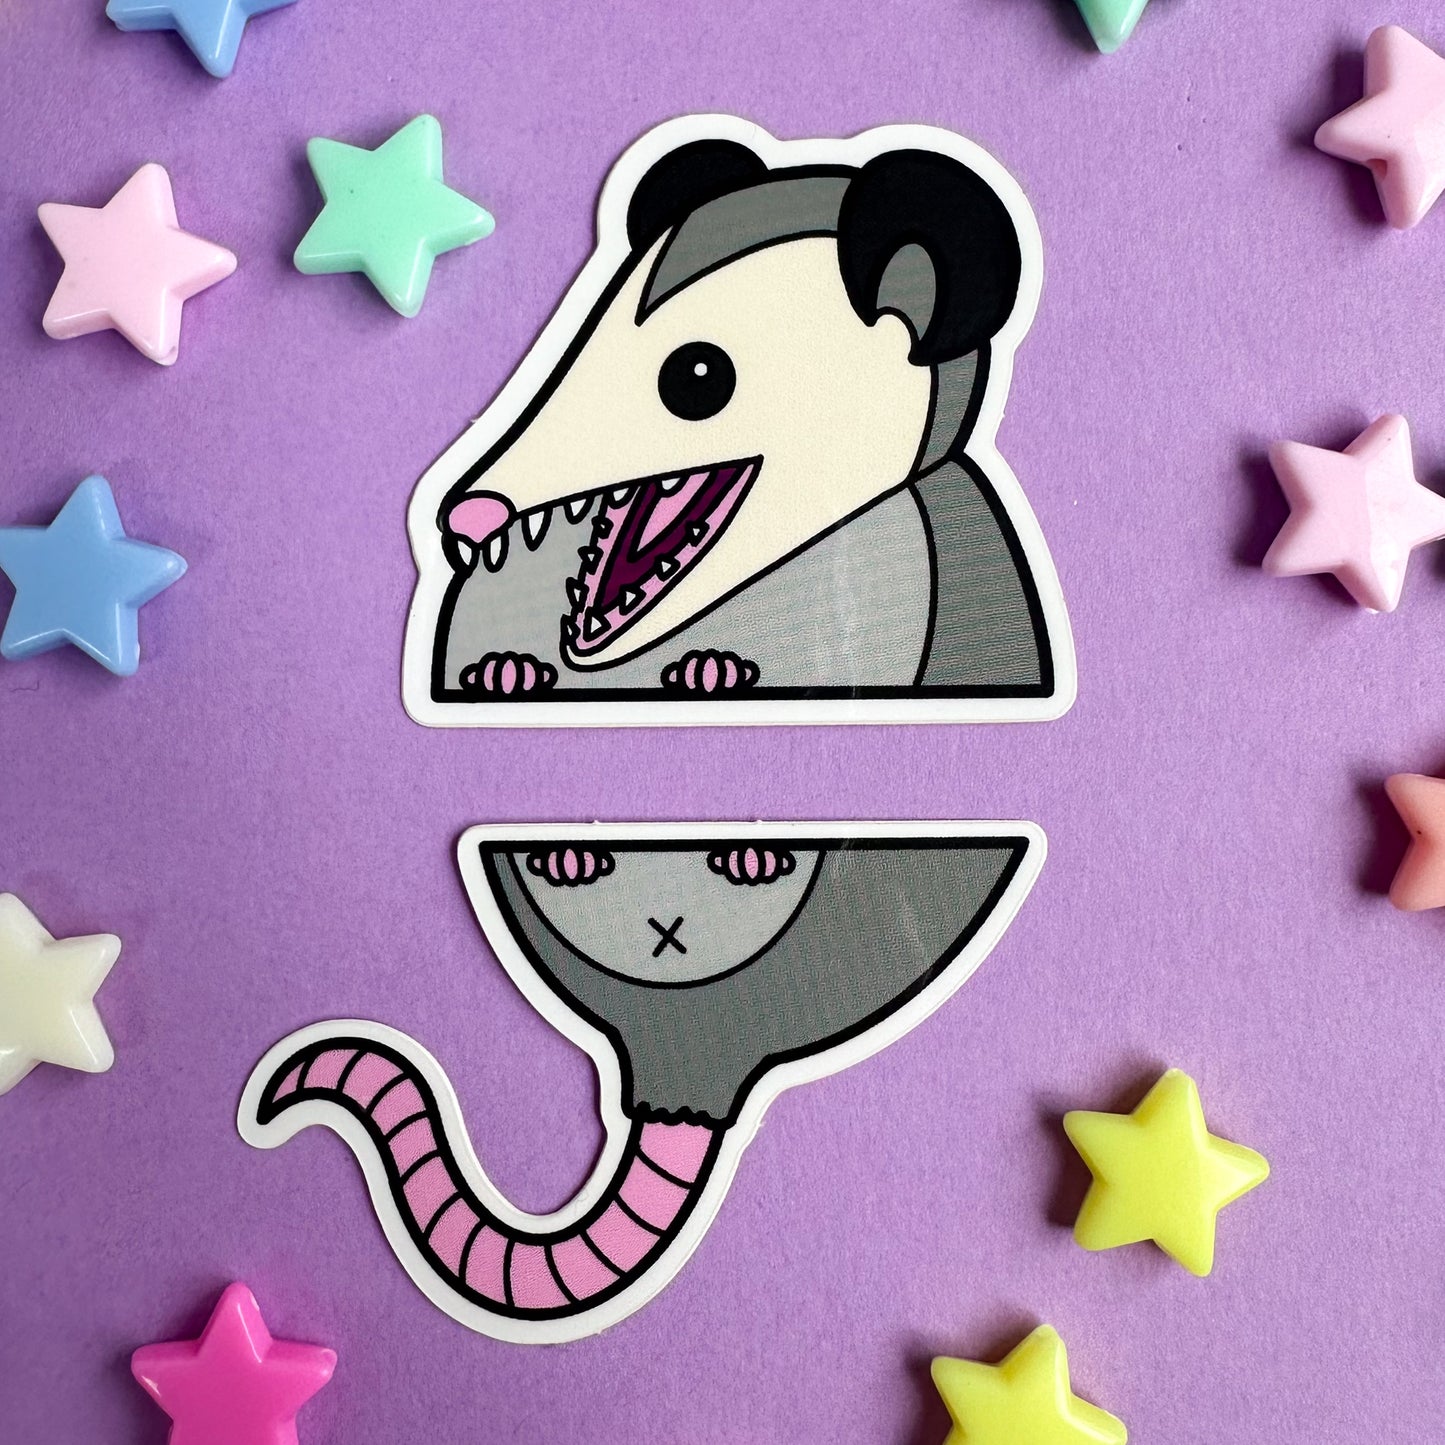 A pair of stickers that come together to form the top and bottom half of a cute opossum. The stickers are on a purple background with pastel stars around it.